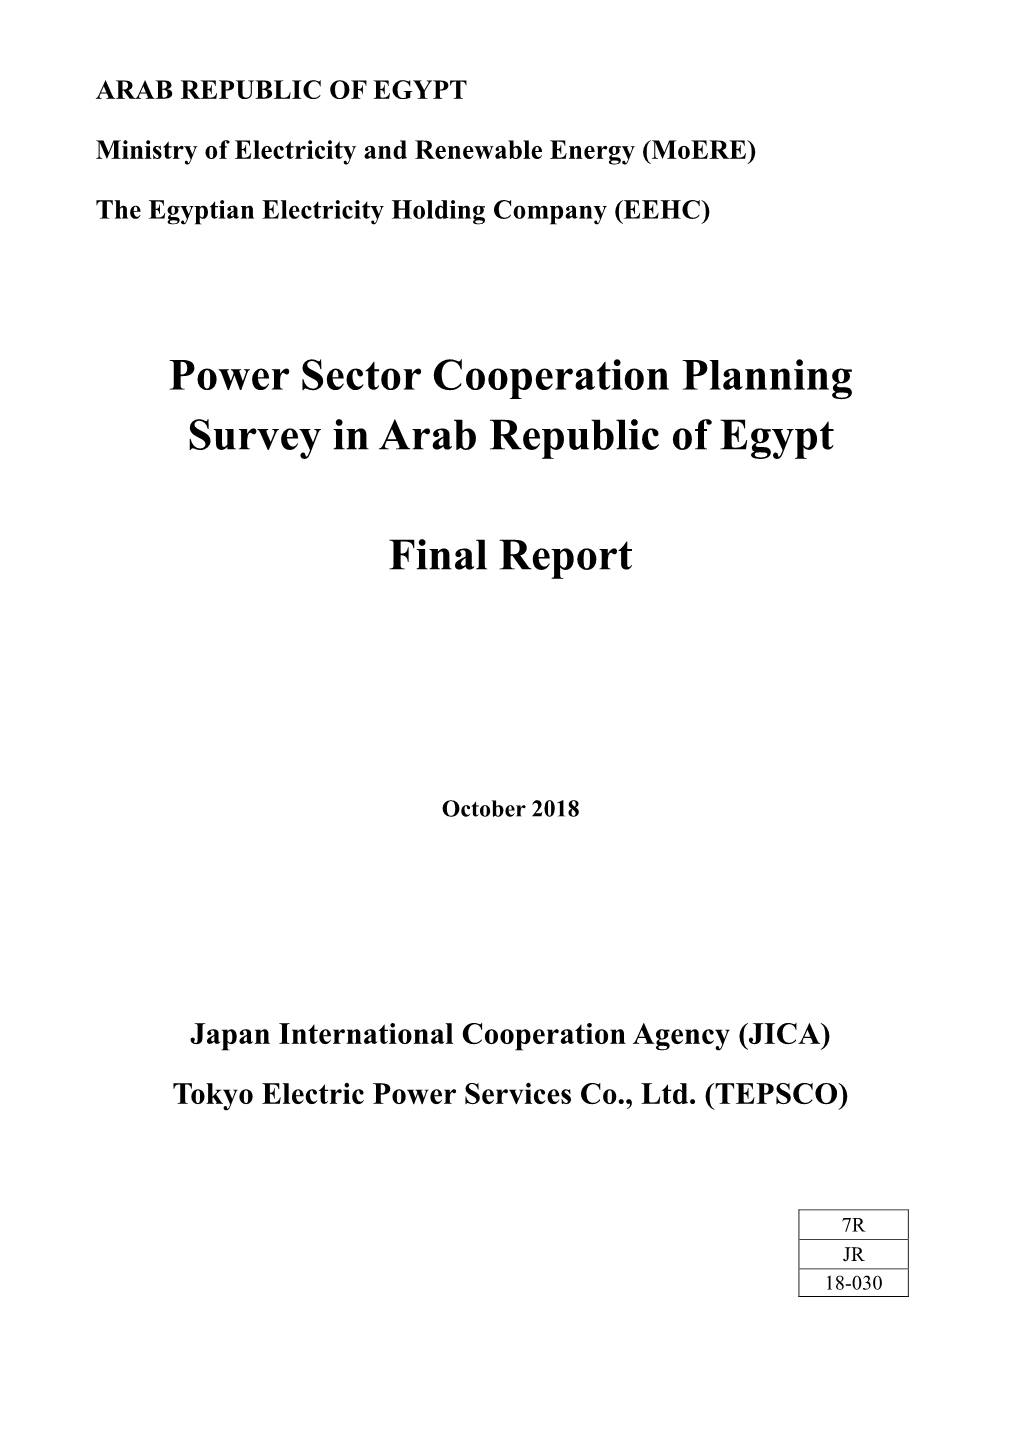 Power Sector Cooperation Planning Survey in Arab Republic of Egypt Final Report